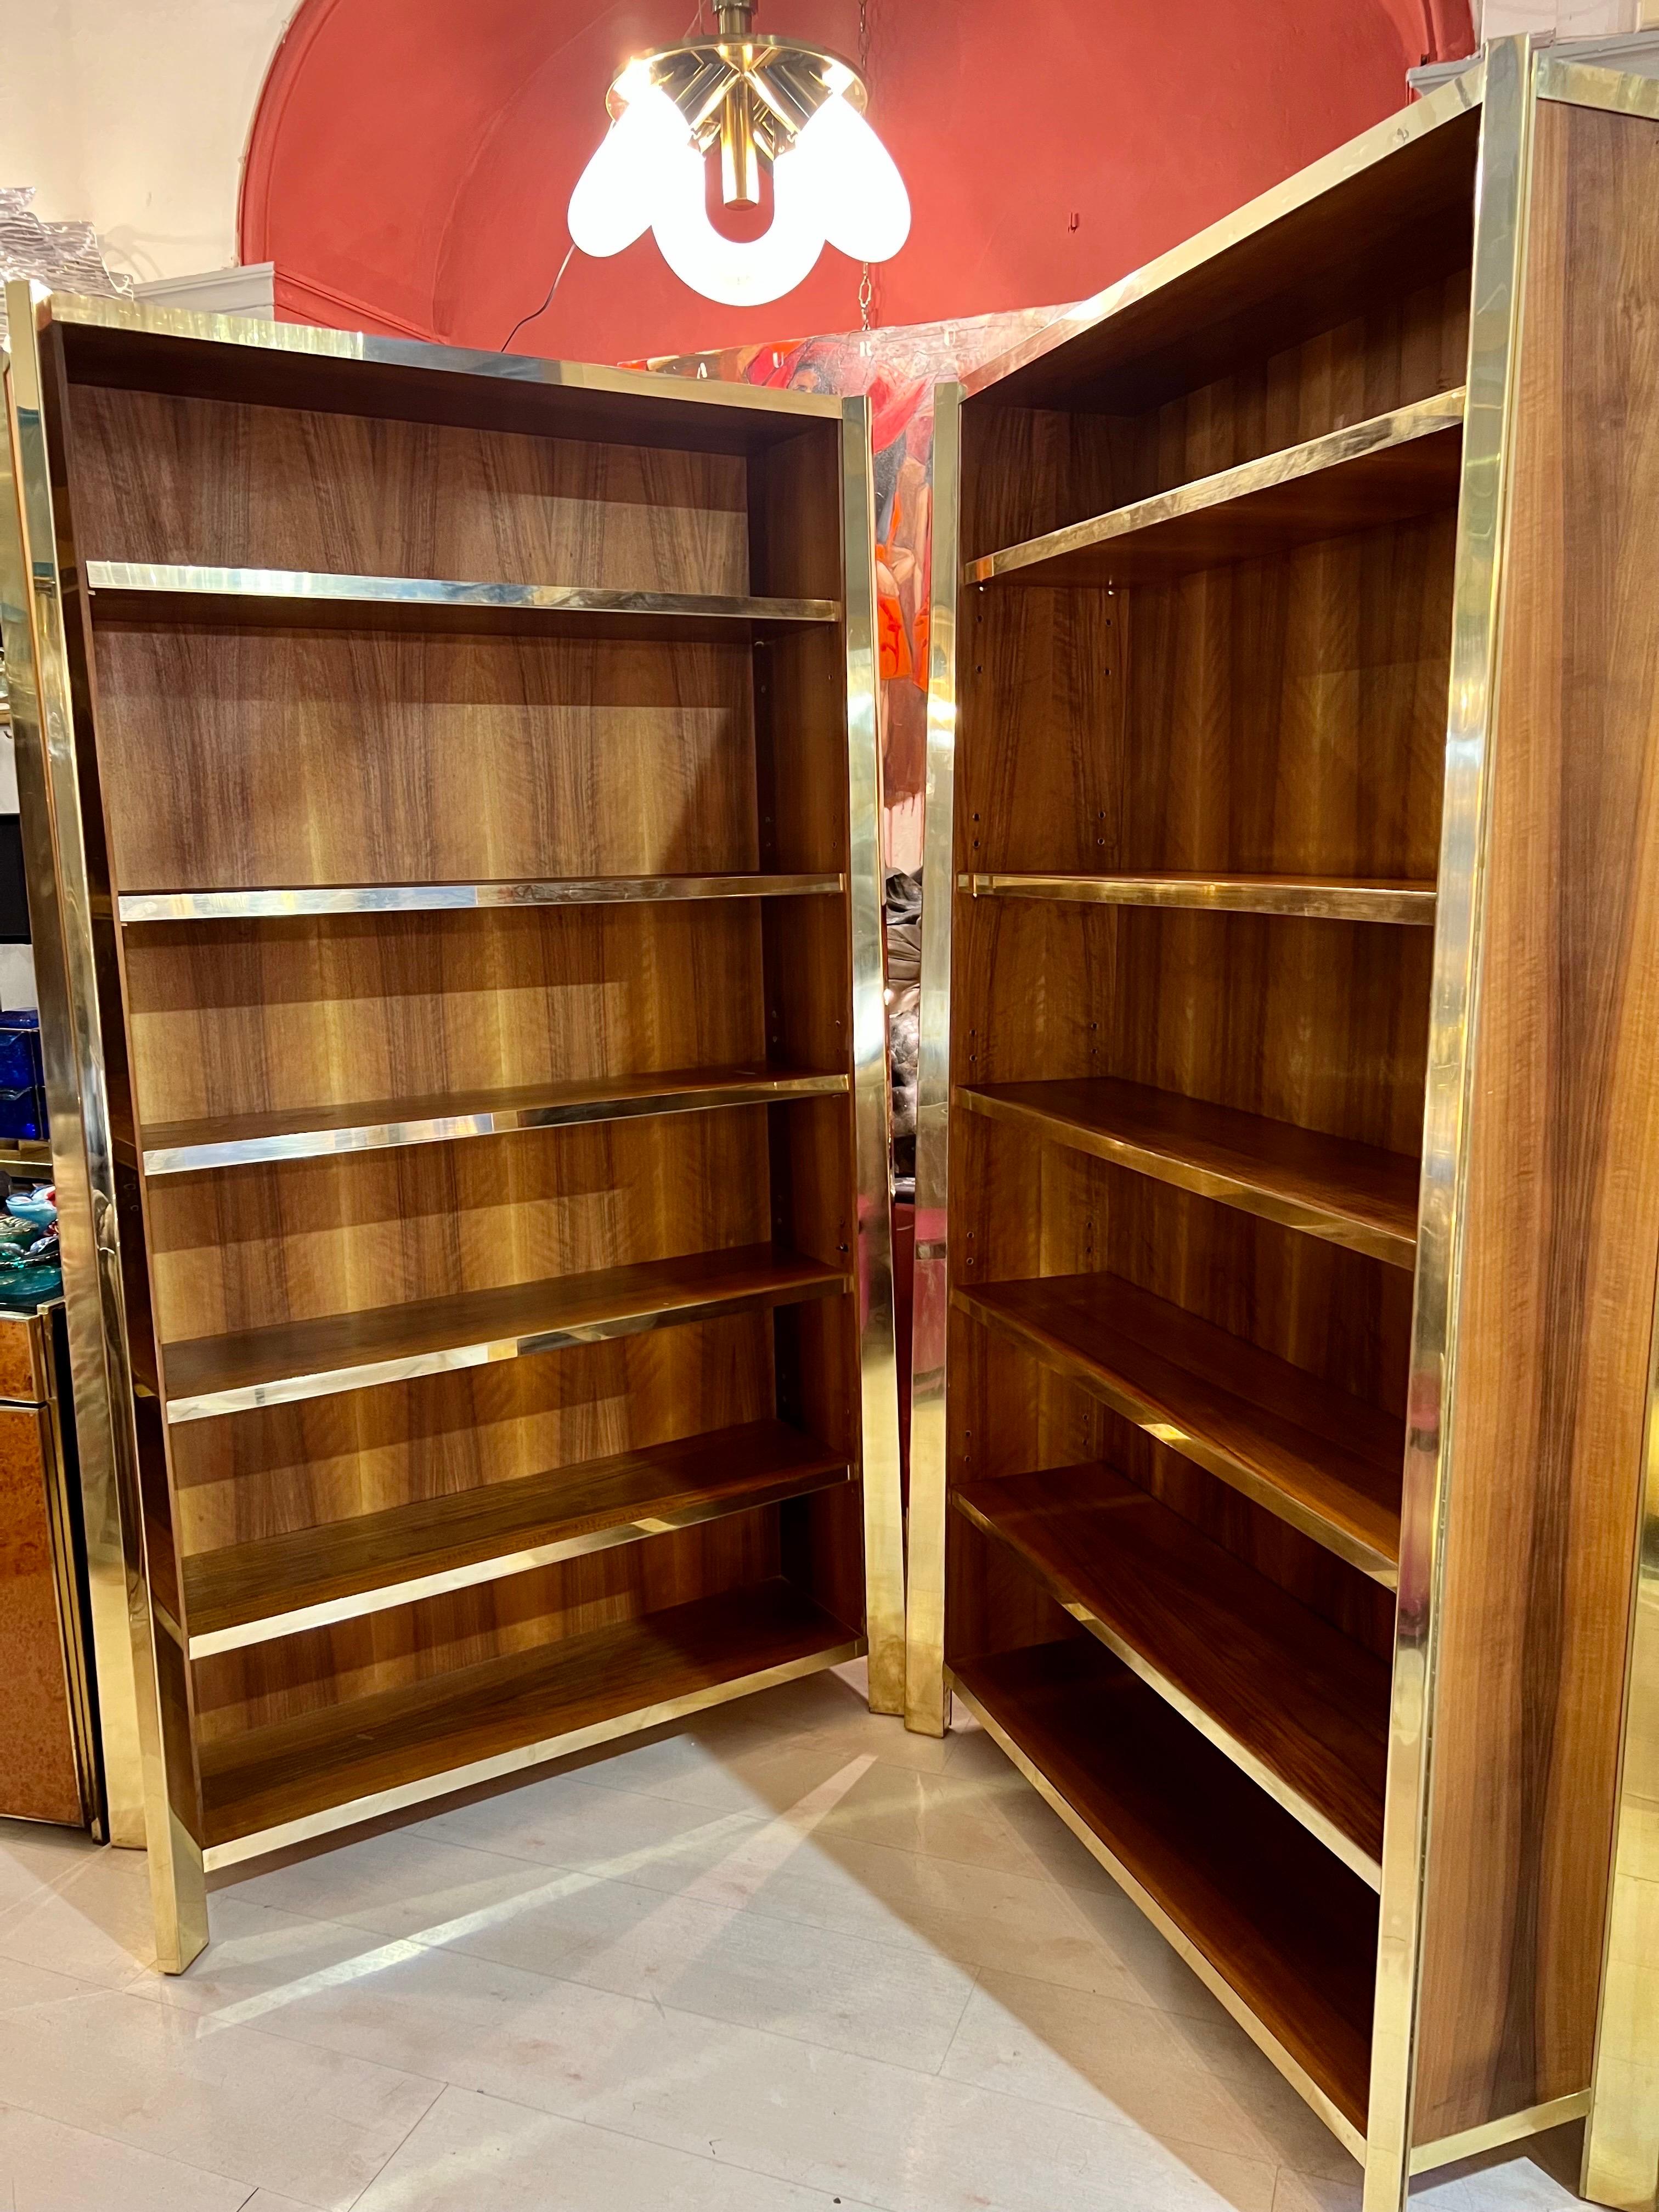 Pair of Cherry wood bookcases with brass profiles and 5 shelves with brass edges. The Italian manufacture is functional and high quality pieces of furniture captured the innovative spirit in furniture design of the 1980s.
Can be sold